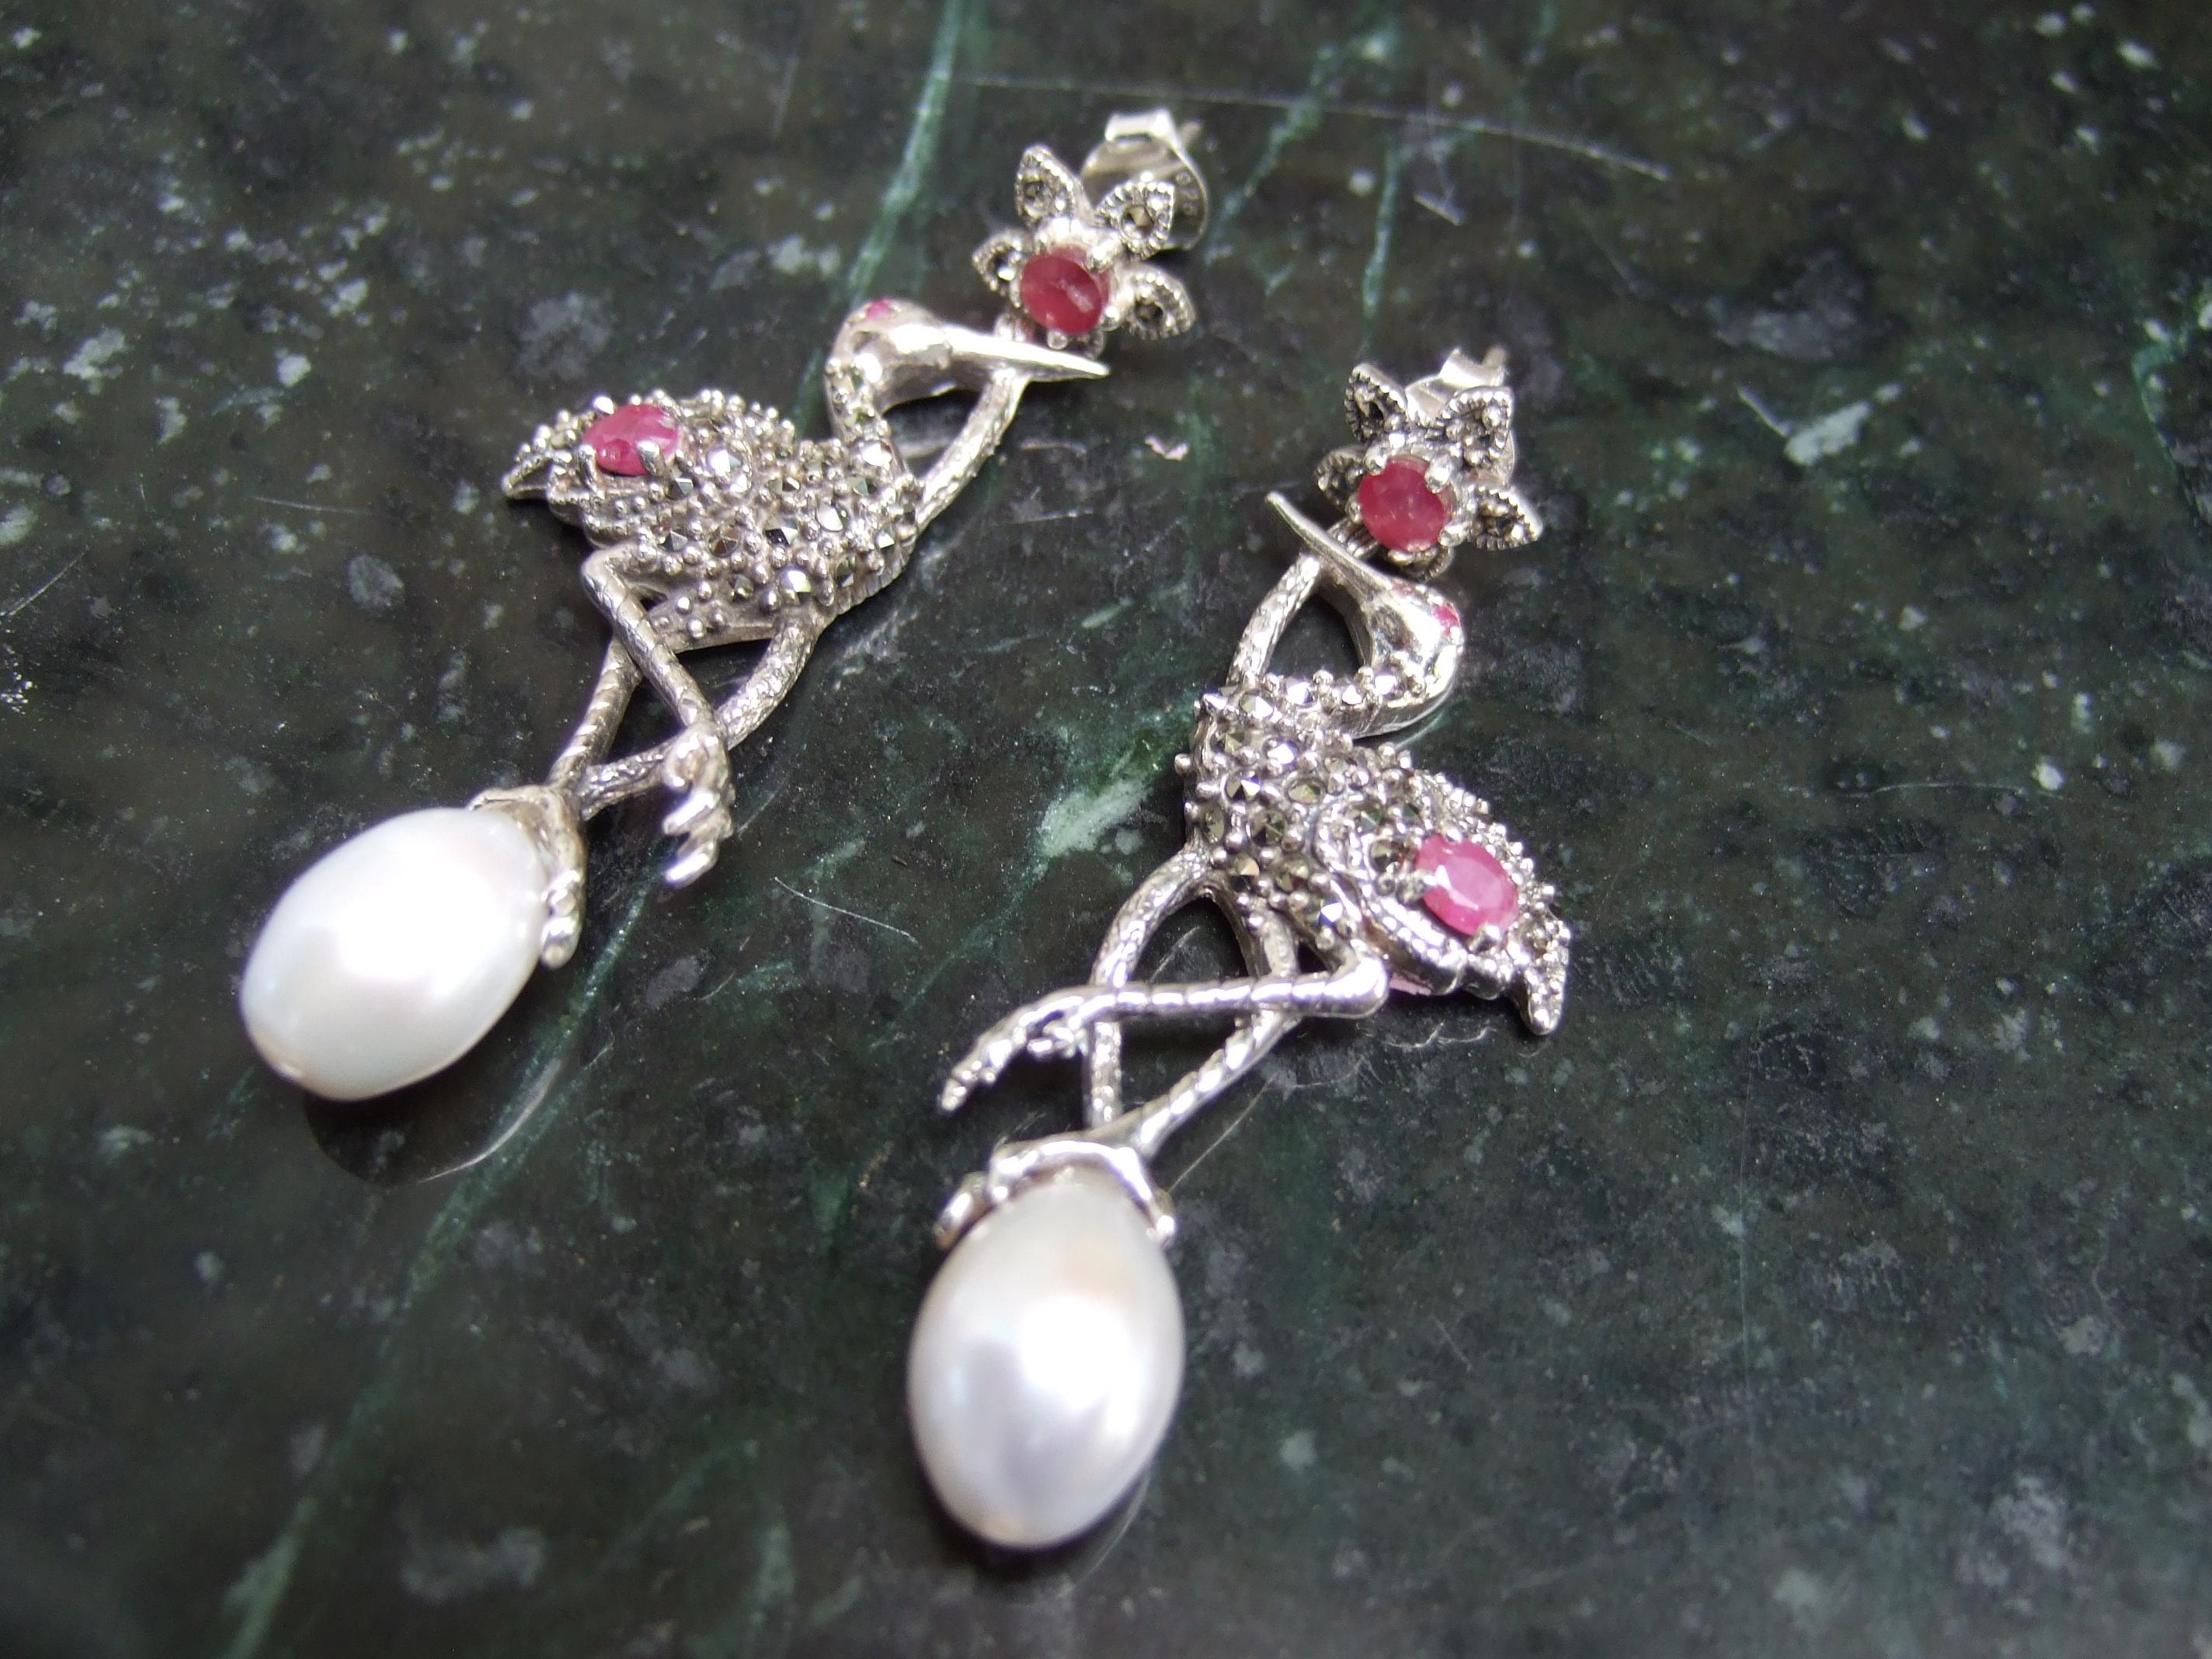 Exquisite sterling silver ruby crystal fresh water pearl marcasite bird earrings 21st c 
The elegant sterling silver earrings encrusted with ruby color prong set crystals
Accented with clusters of glittering marcasites

Each of the birds is